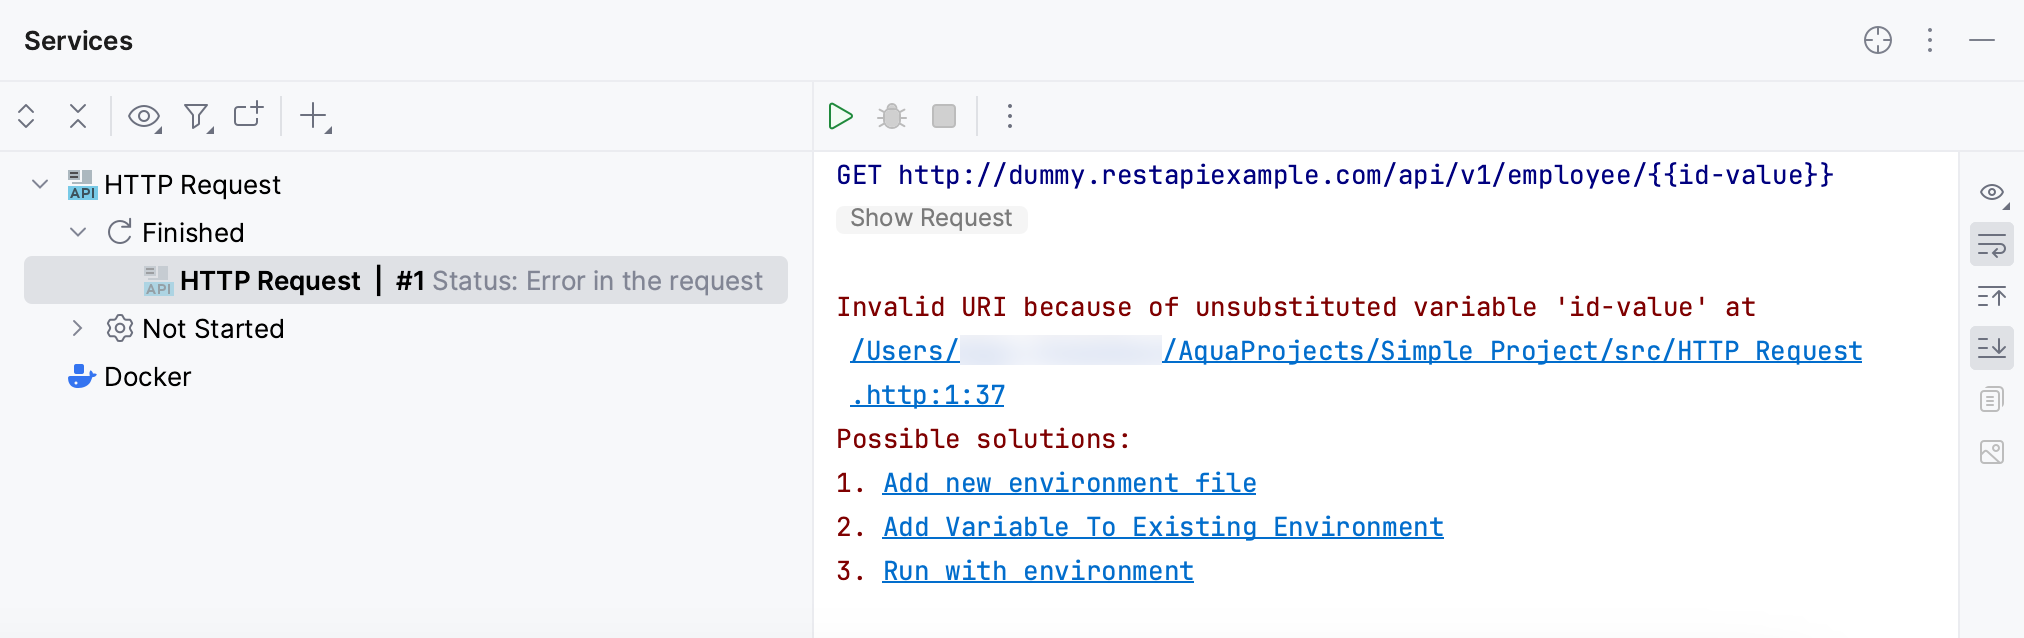 Unresolved Variable in HTTP request notification